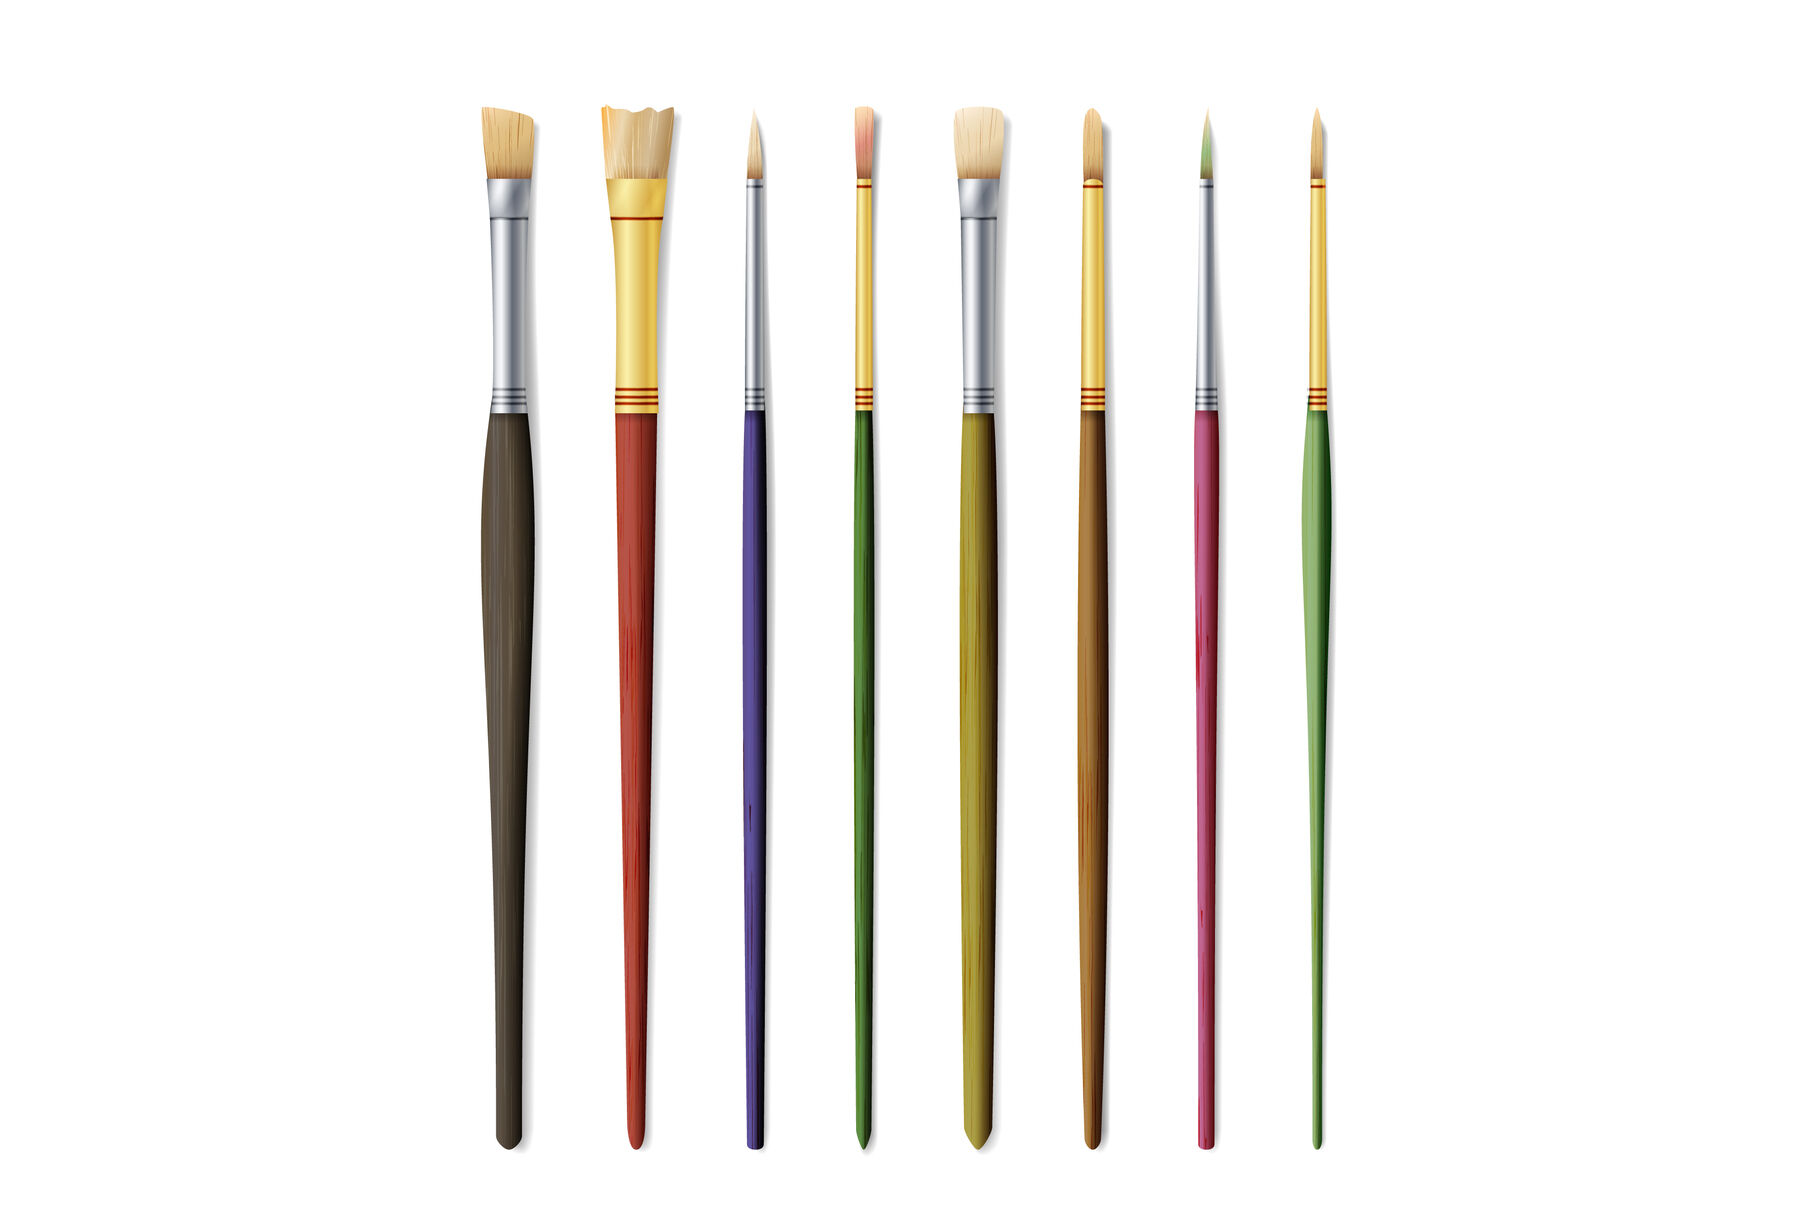 Oil painting brushes on a white background Vector Image